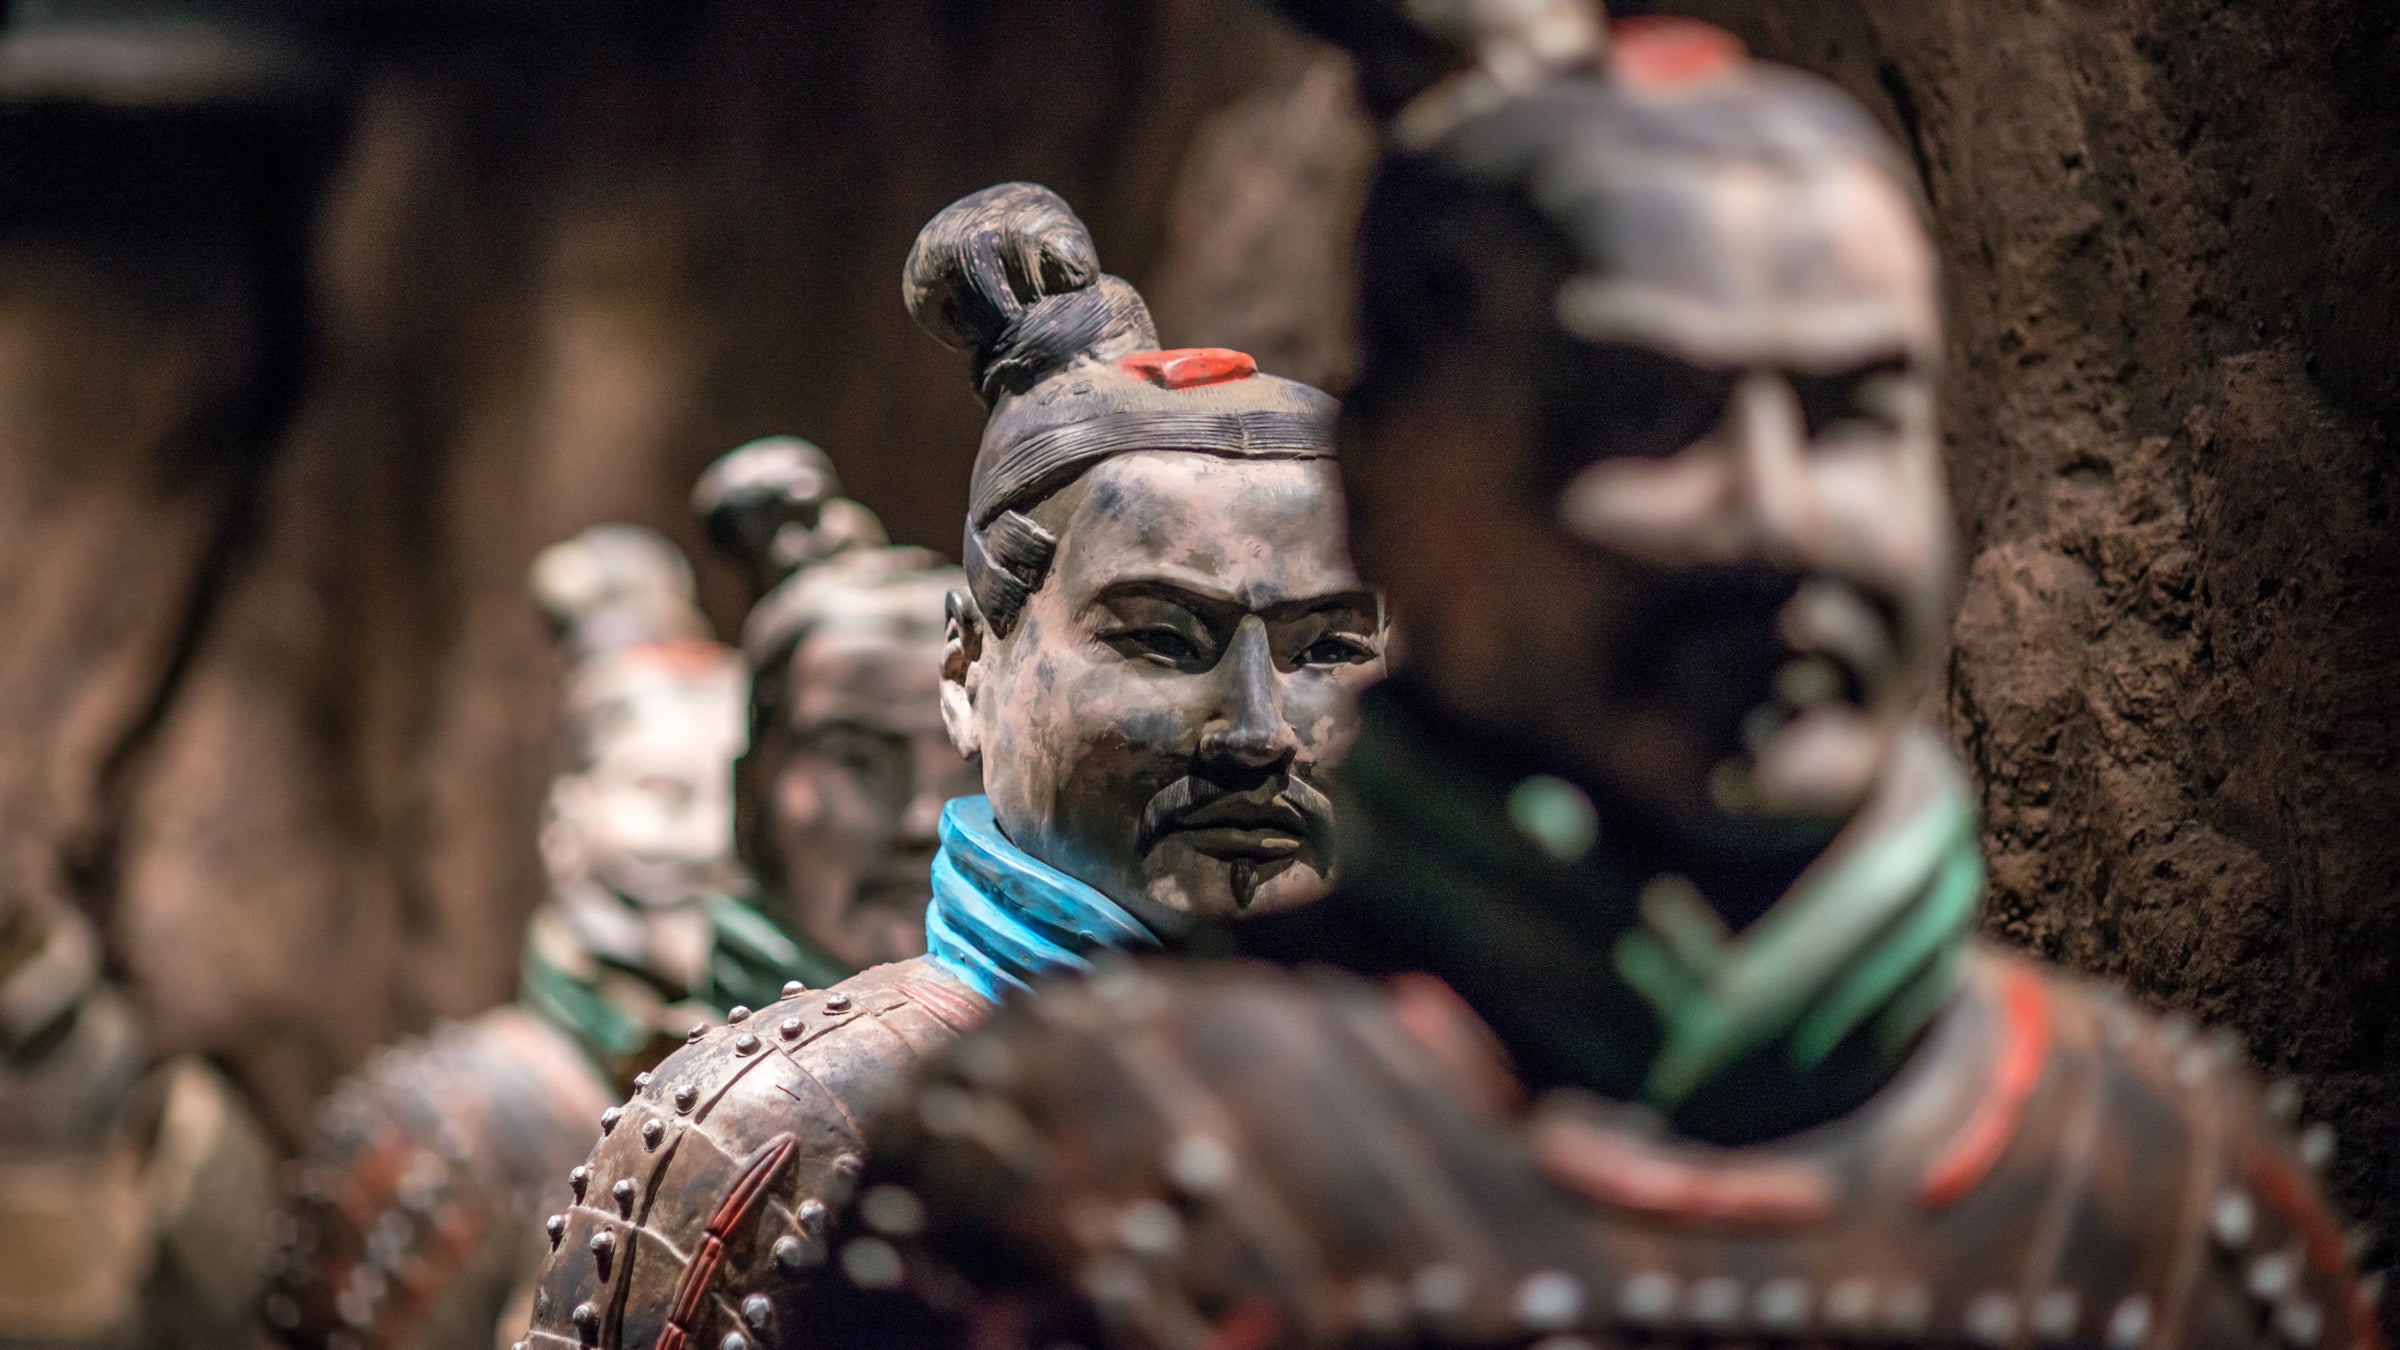  ''The Terracotta Warriors of the First Emperor'' opens in September at the Franklin Institute. The 6,000-square-foot exhibition will feature 10 life-size clay soldiers and 164 artifacts, interactive components, and augmented reality experiences. (The Franklin Institute) 